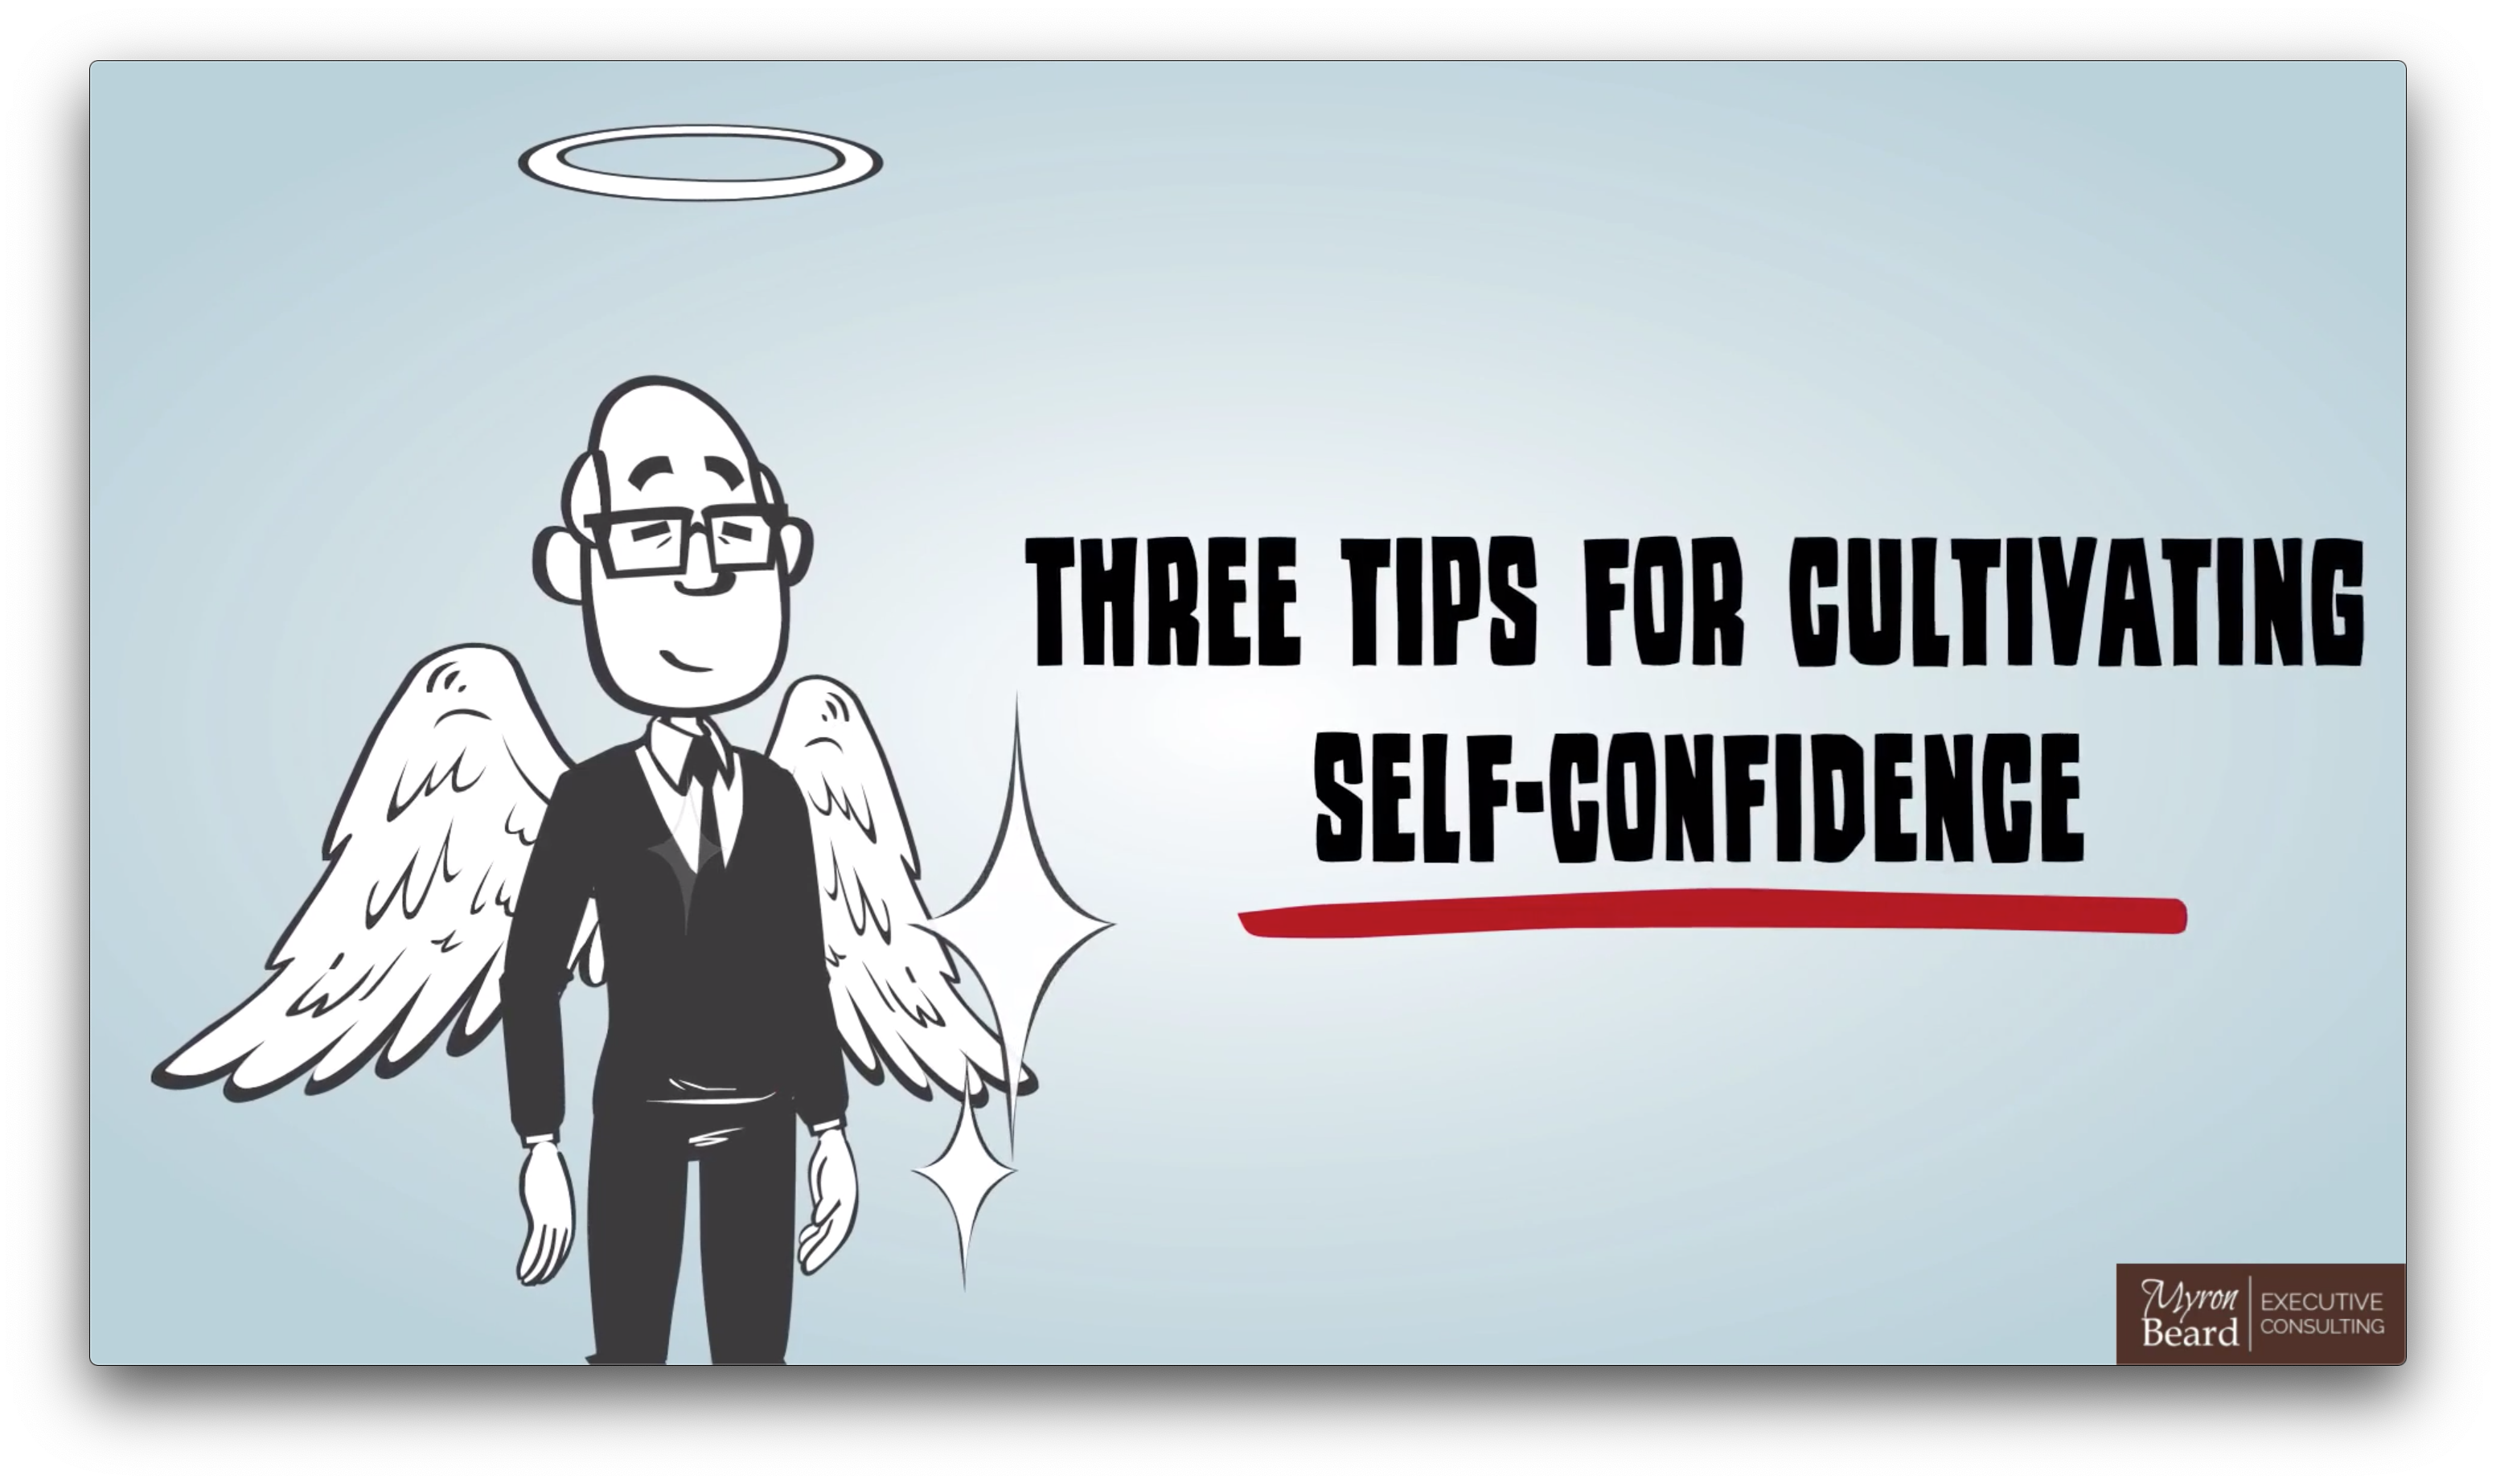 Three Tips for Cultivating Self-Confidence